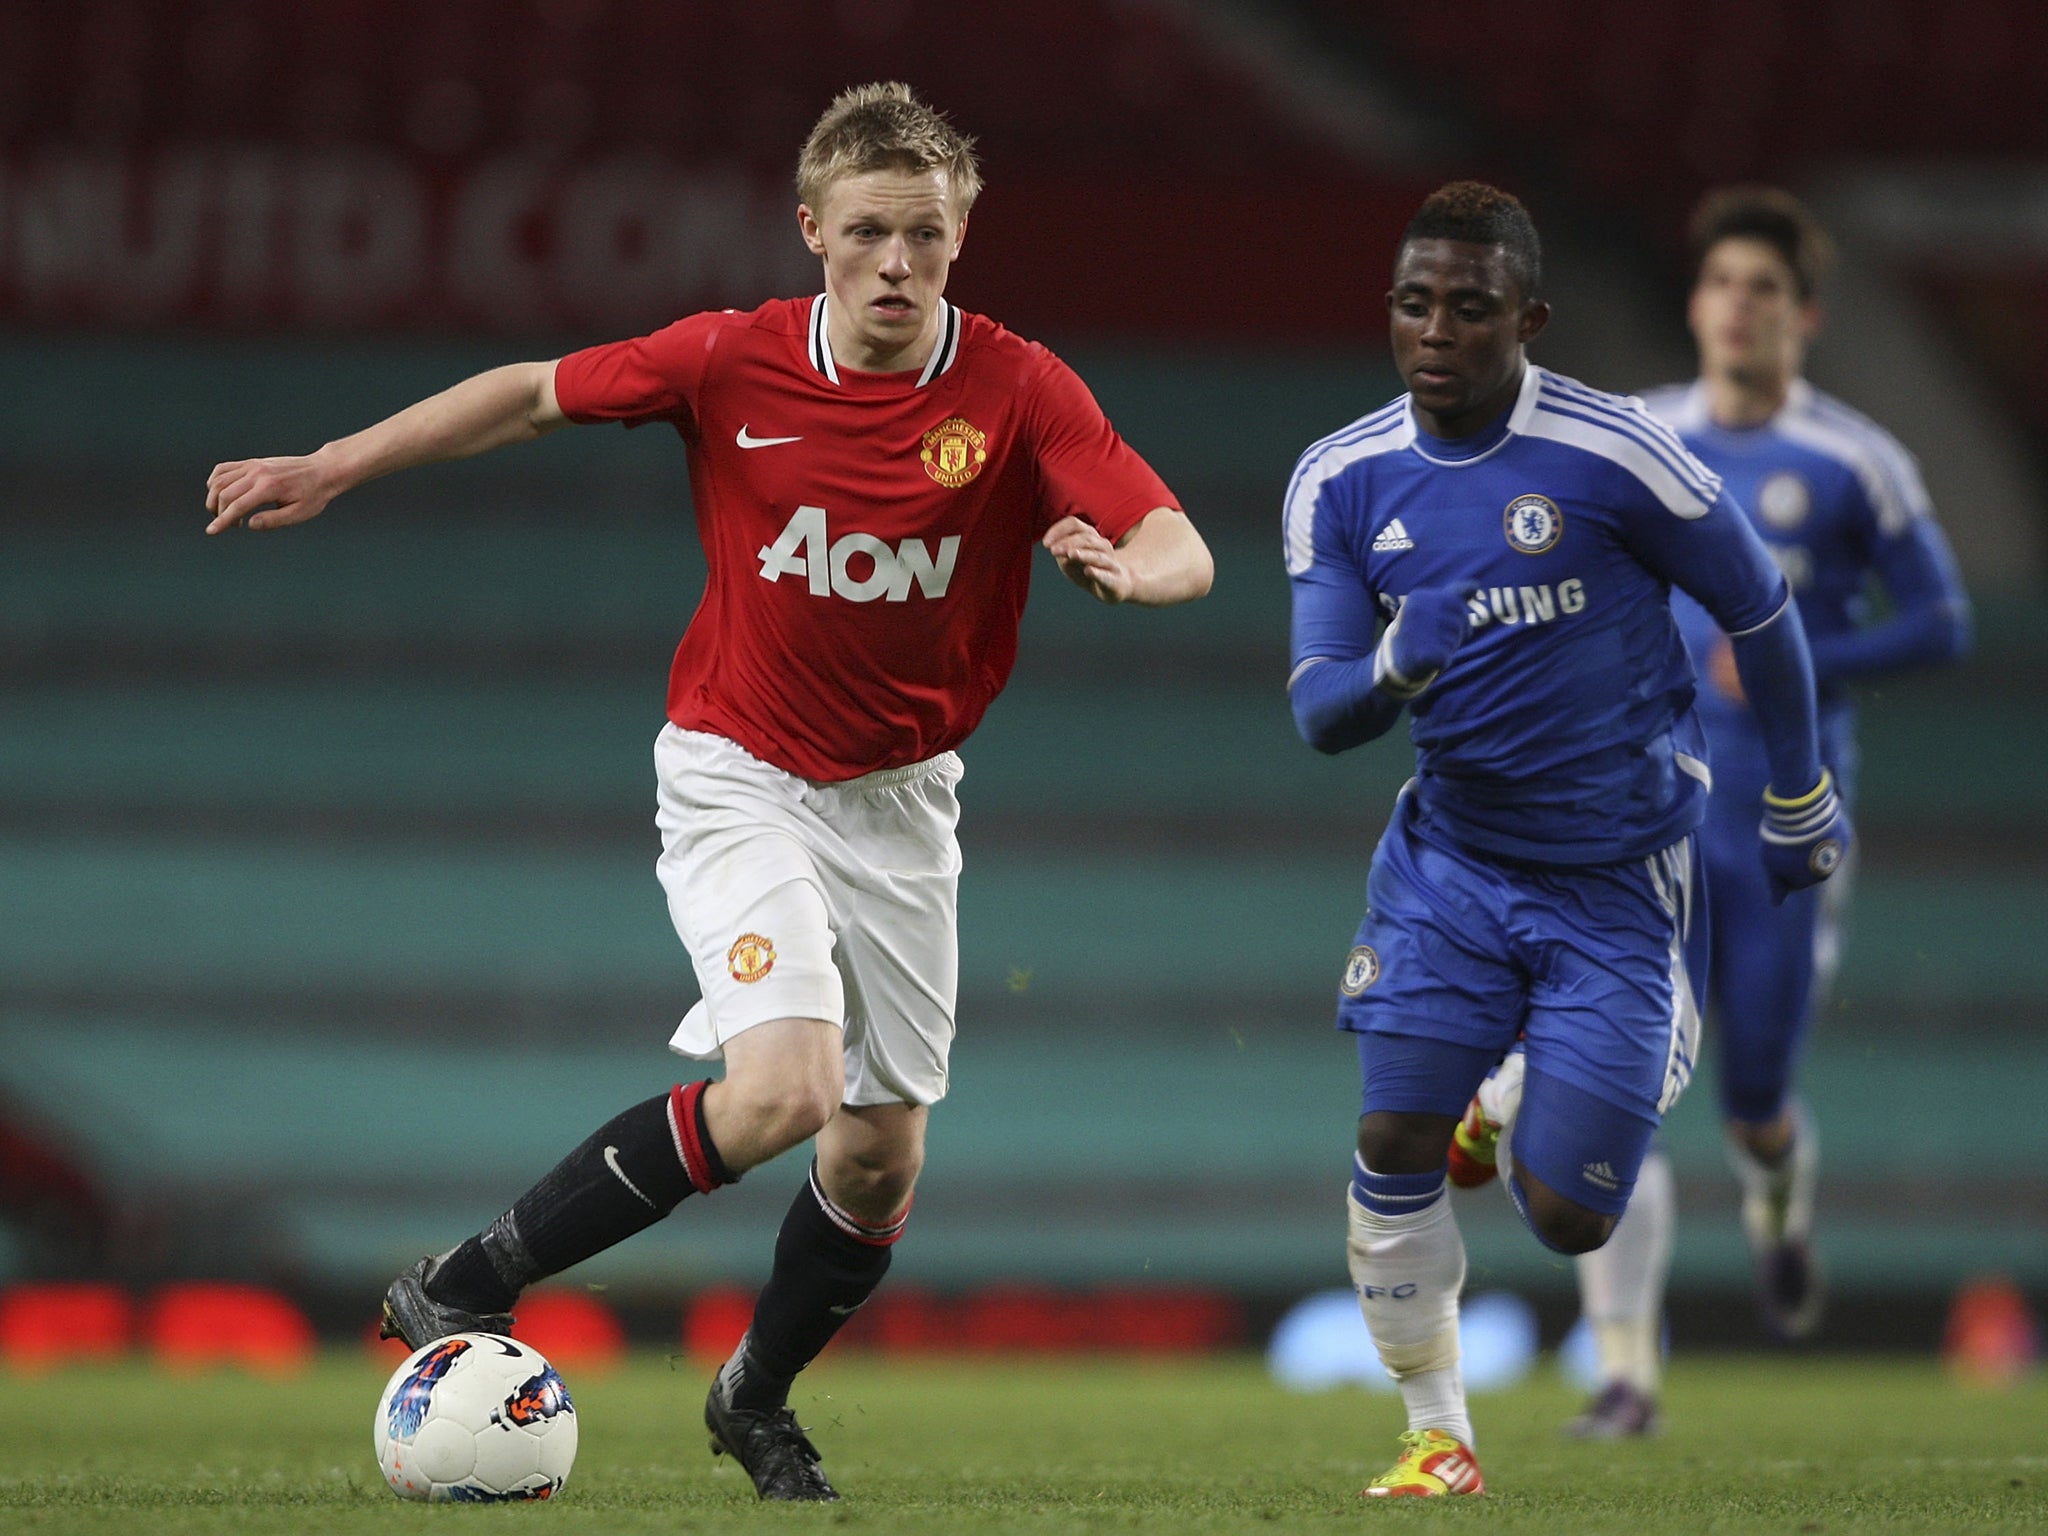 Mats Daehli in action for the Manchester United academy